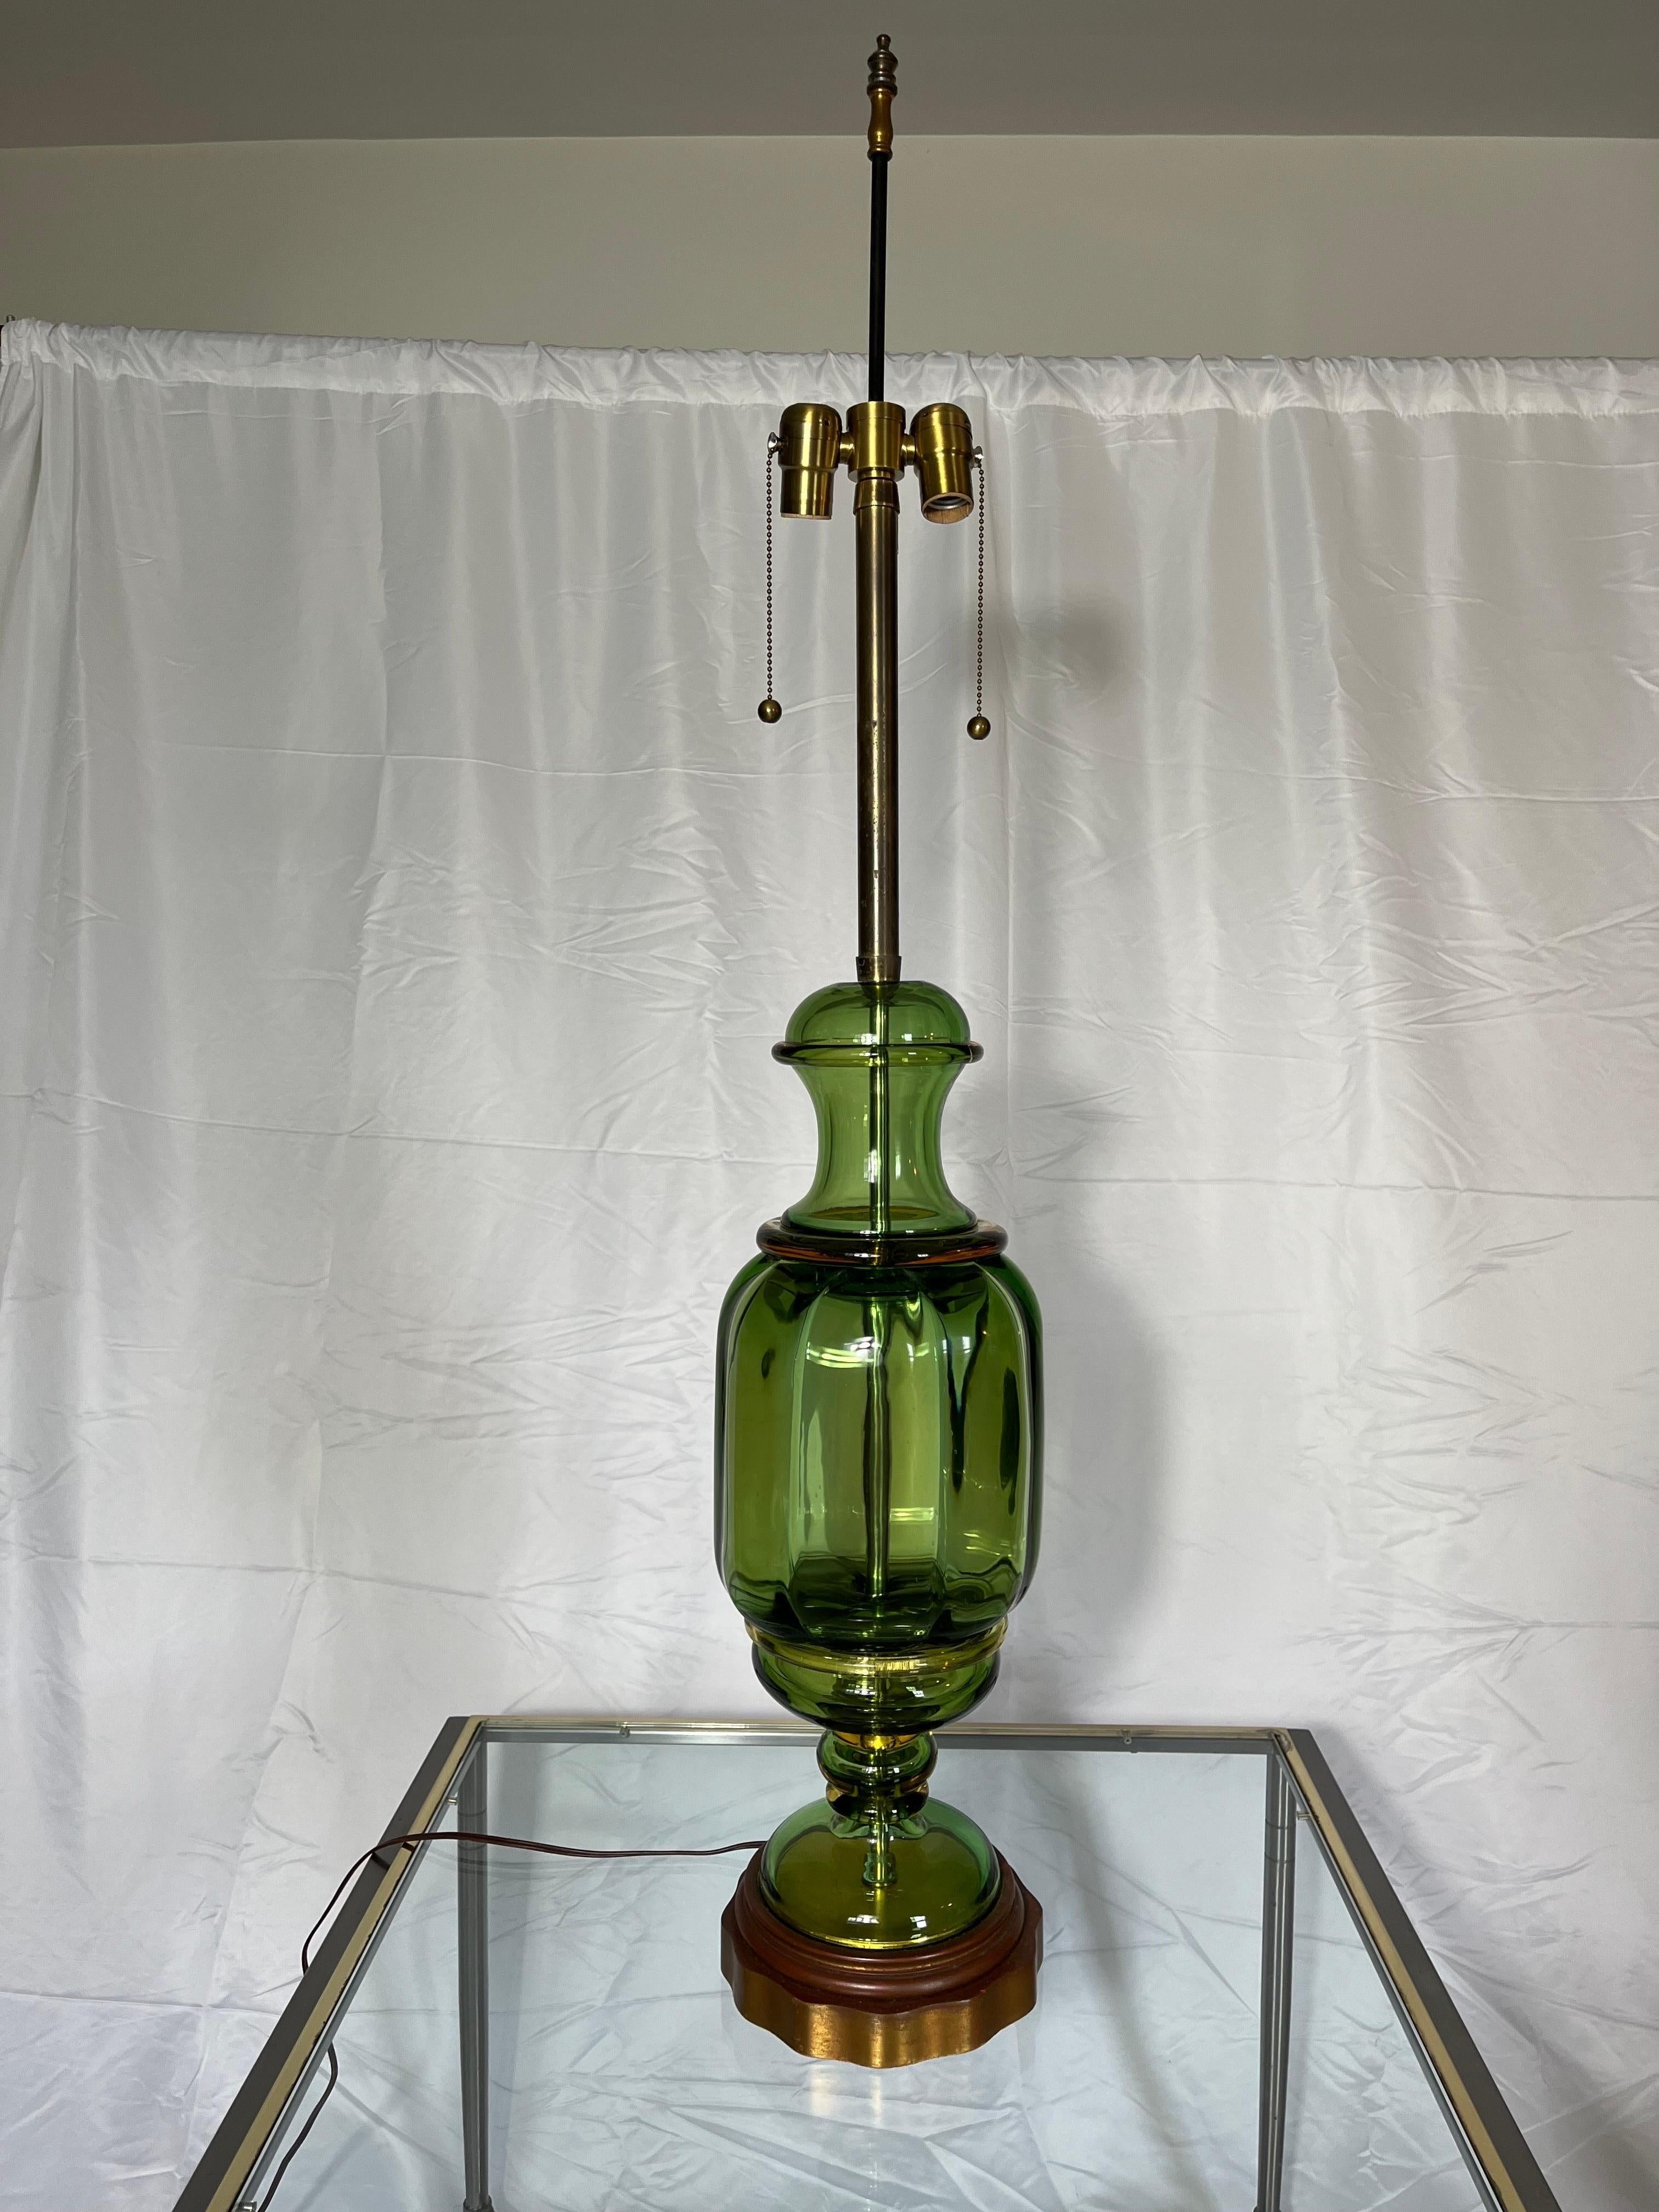 An circa 1950s Italian table lamp by Seguso for Marbro Lamp Company, with double socket cluster on clear green, Murano glass body. The lamp is in excellent vintage condition, fully restored with all new wiring and hardware. The dimensions provided